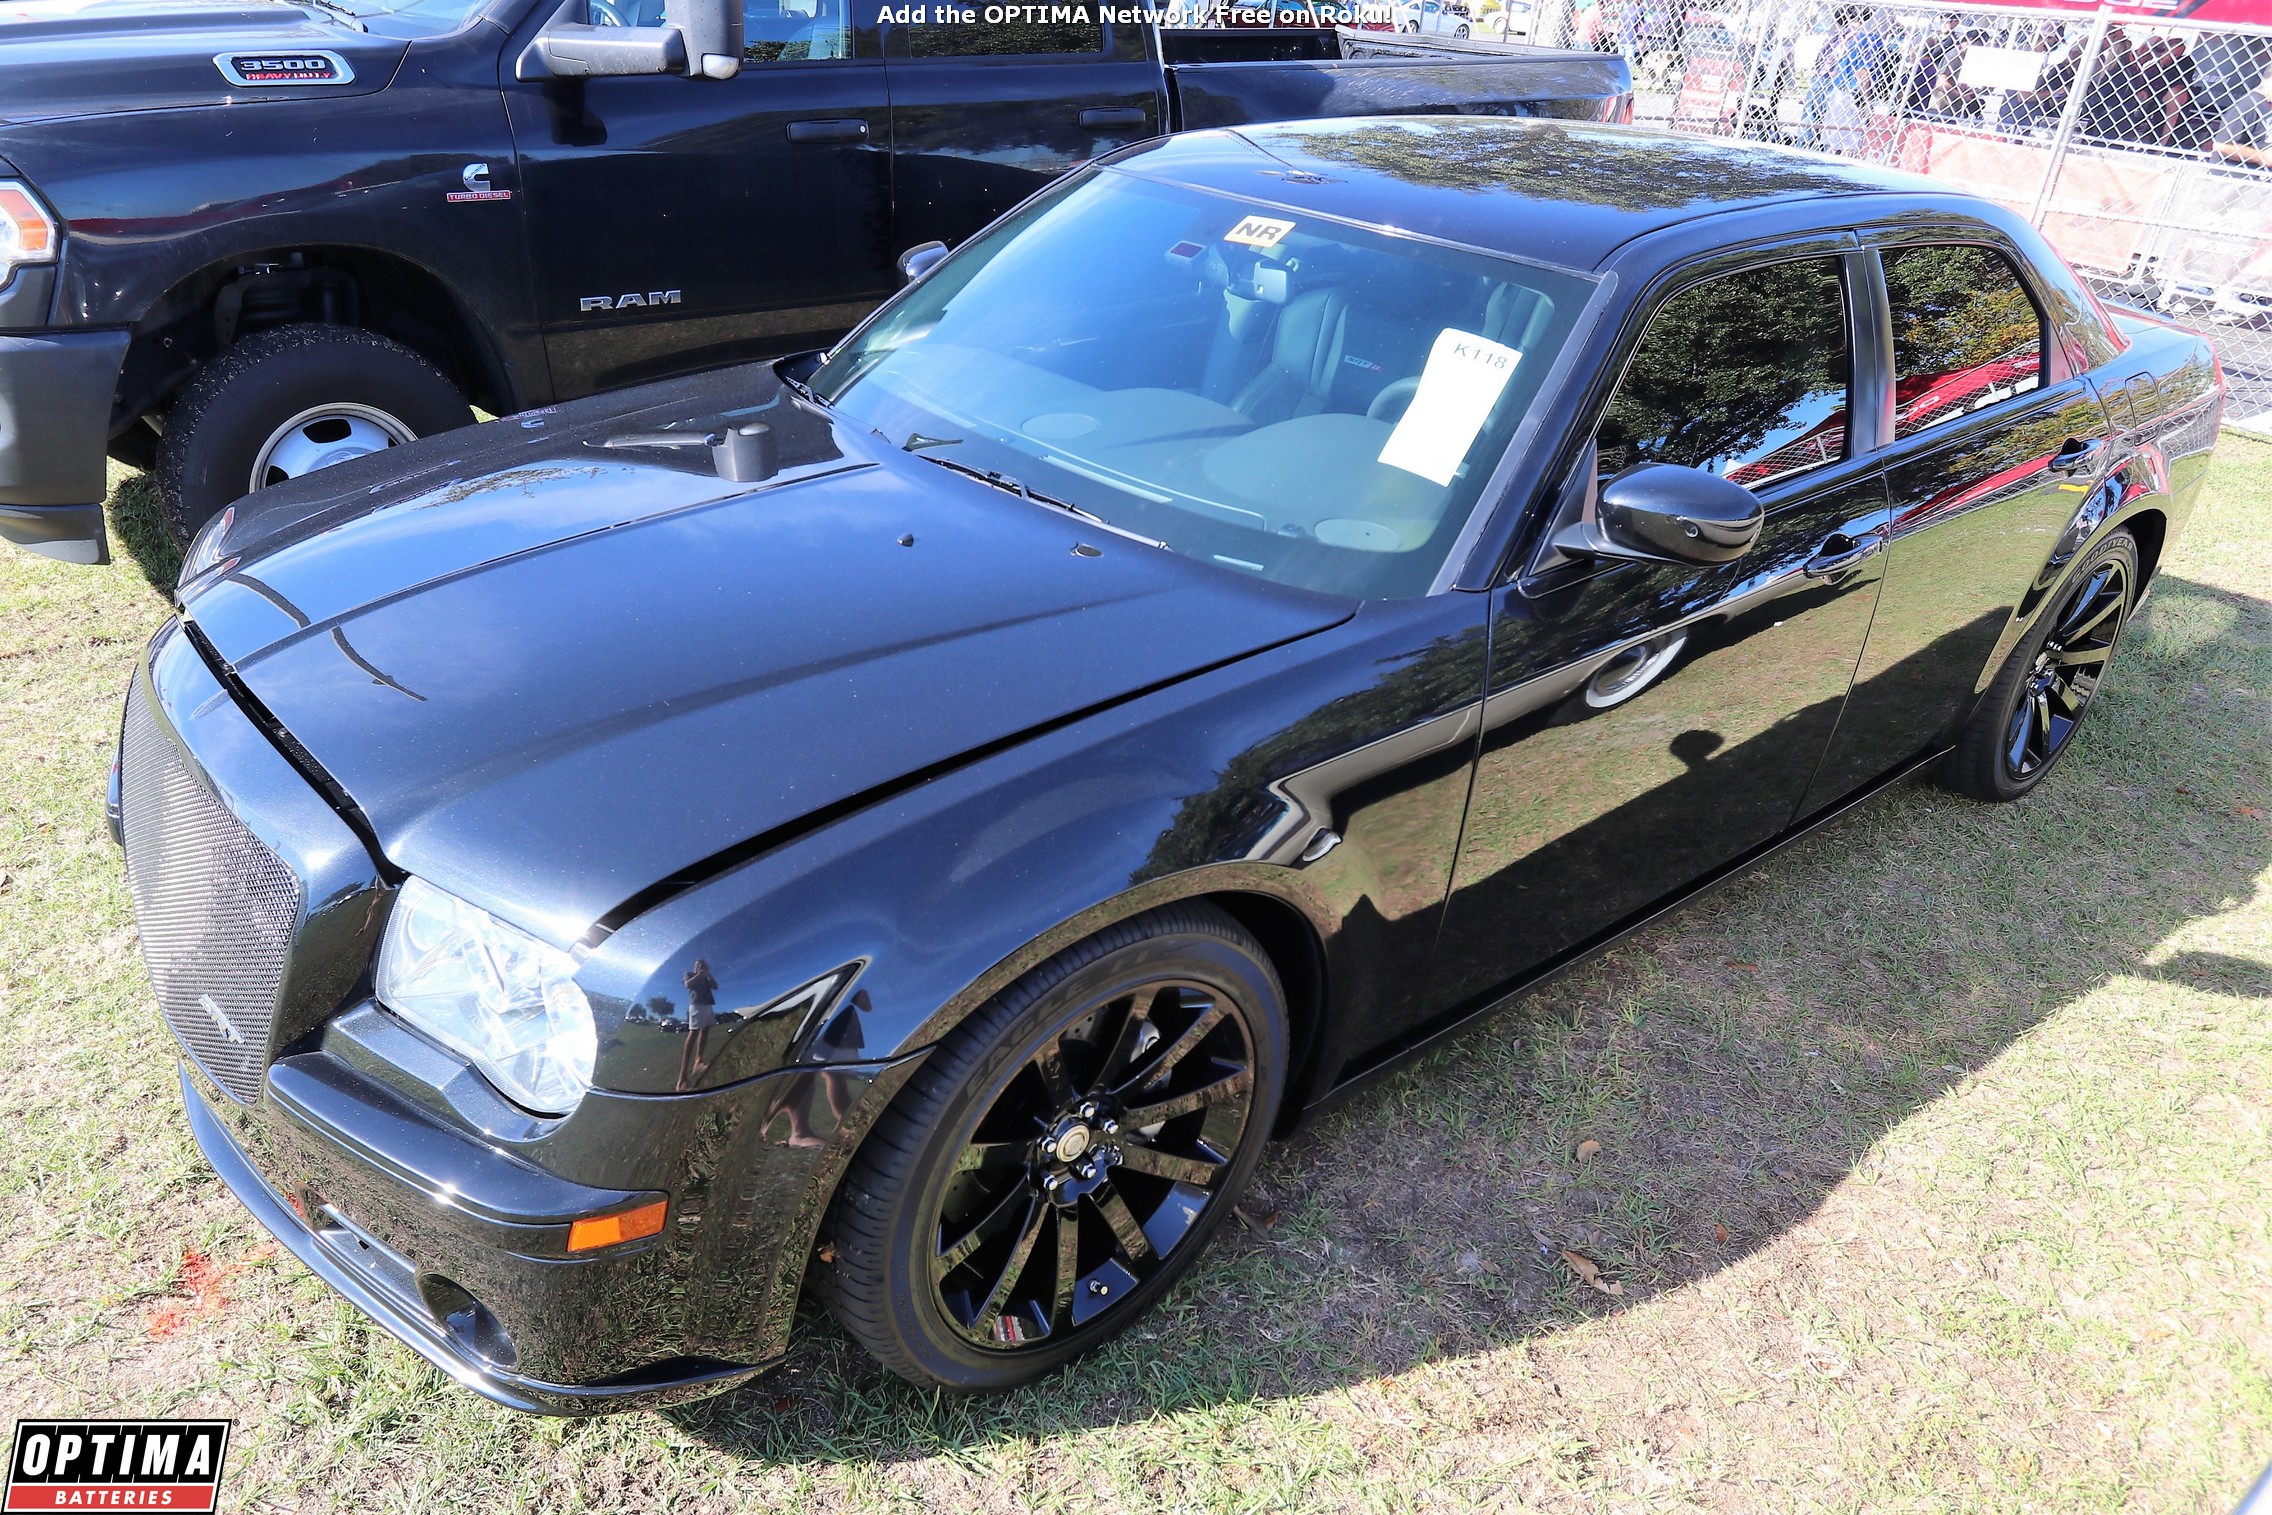 What Type of Battery a Chrysler 300 Have?